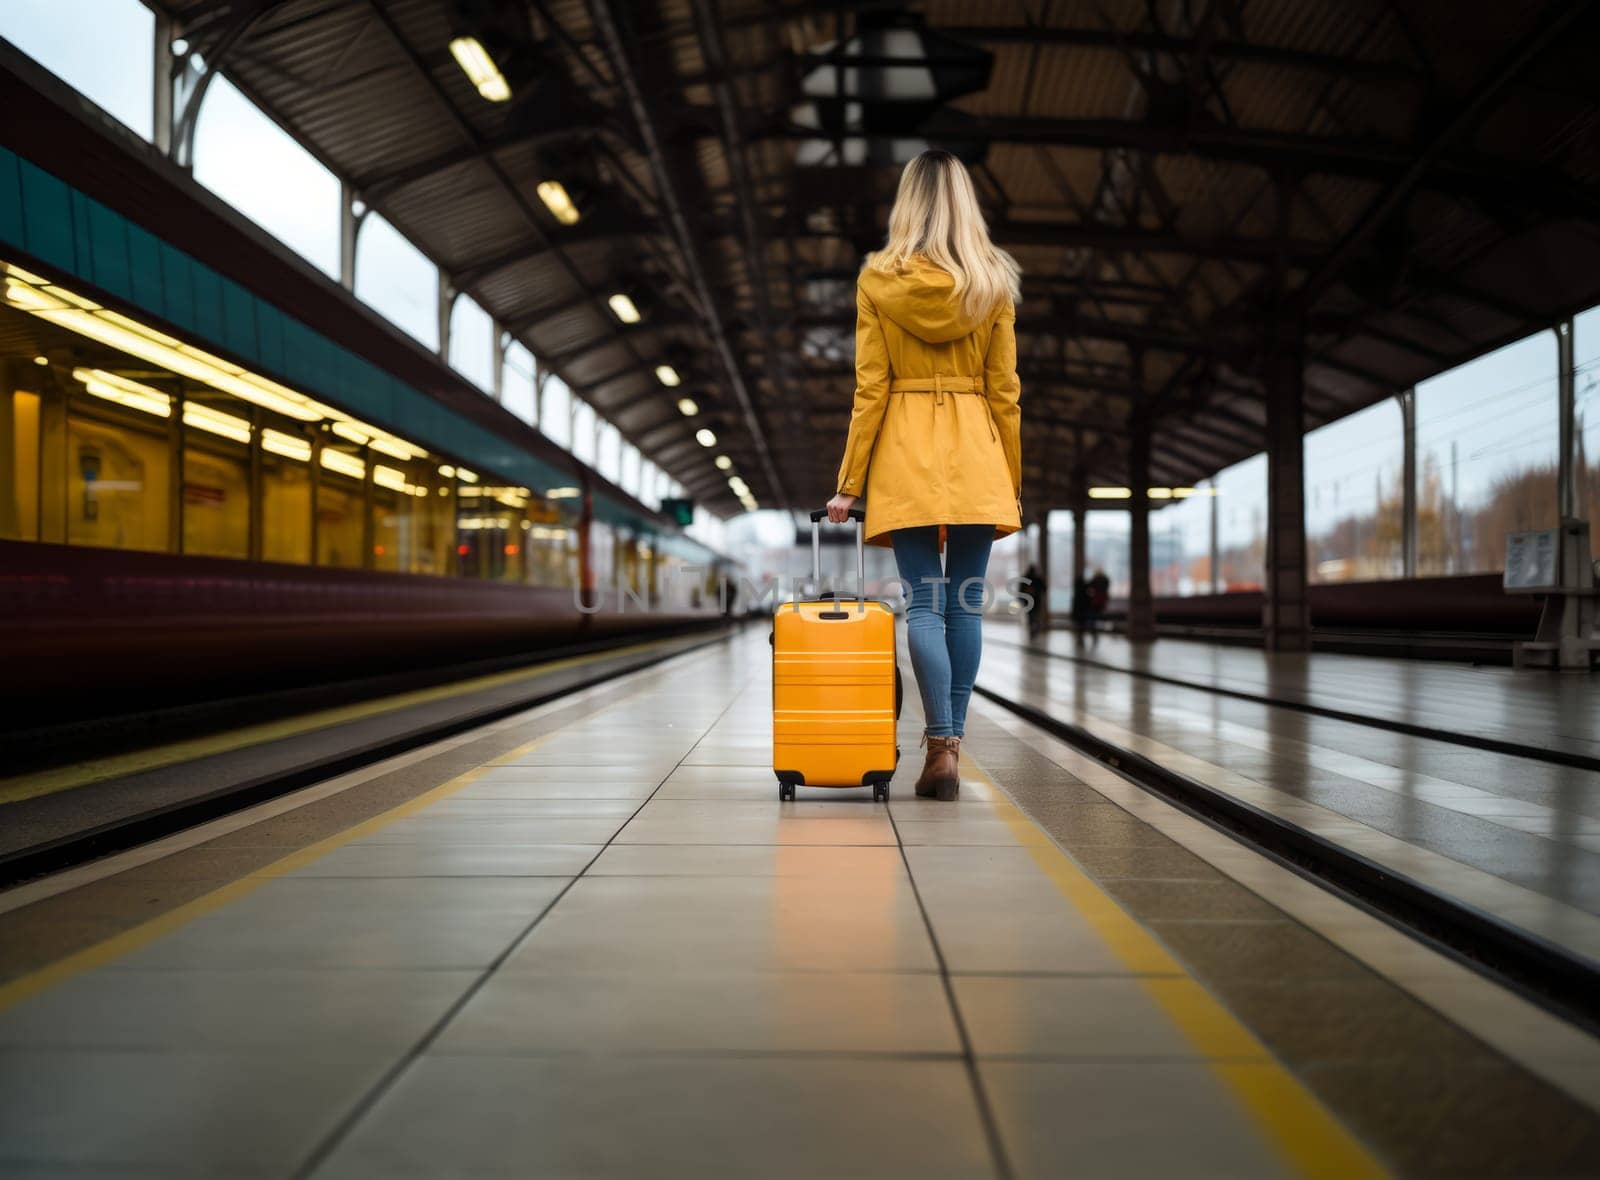 Young female traveler in a bright jacket walking with a yellow suitcase at the modern railway station and waiting for the train, back view. Concept of an urban transportation and travel